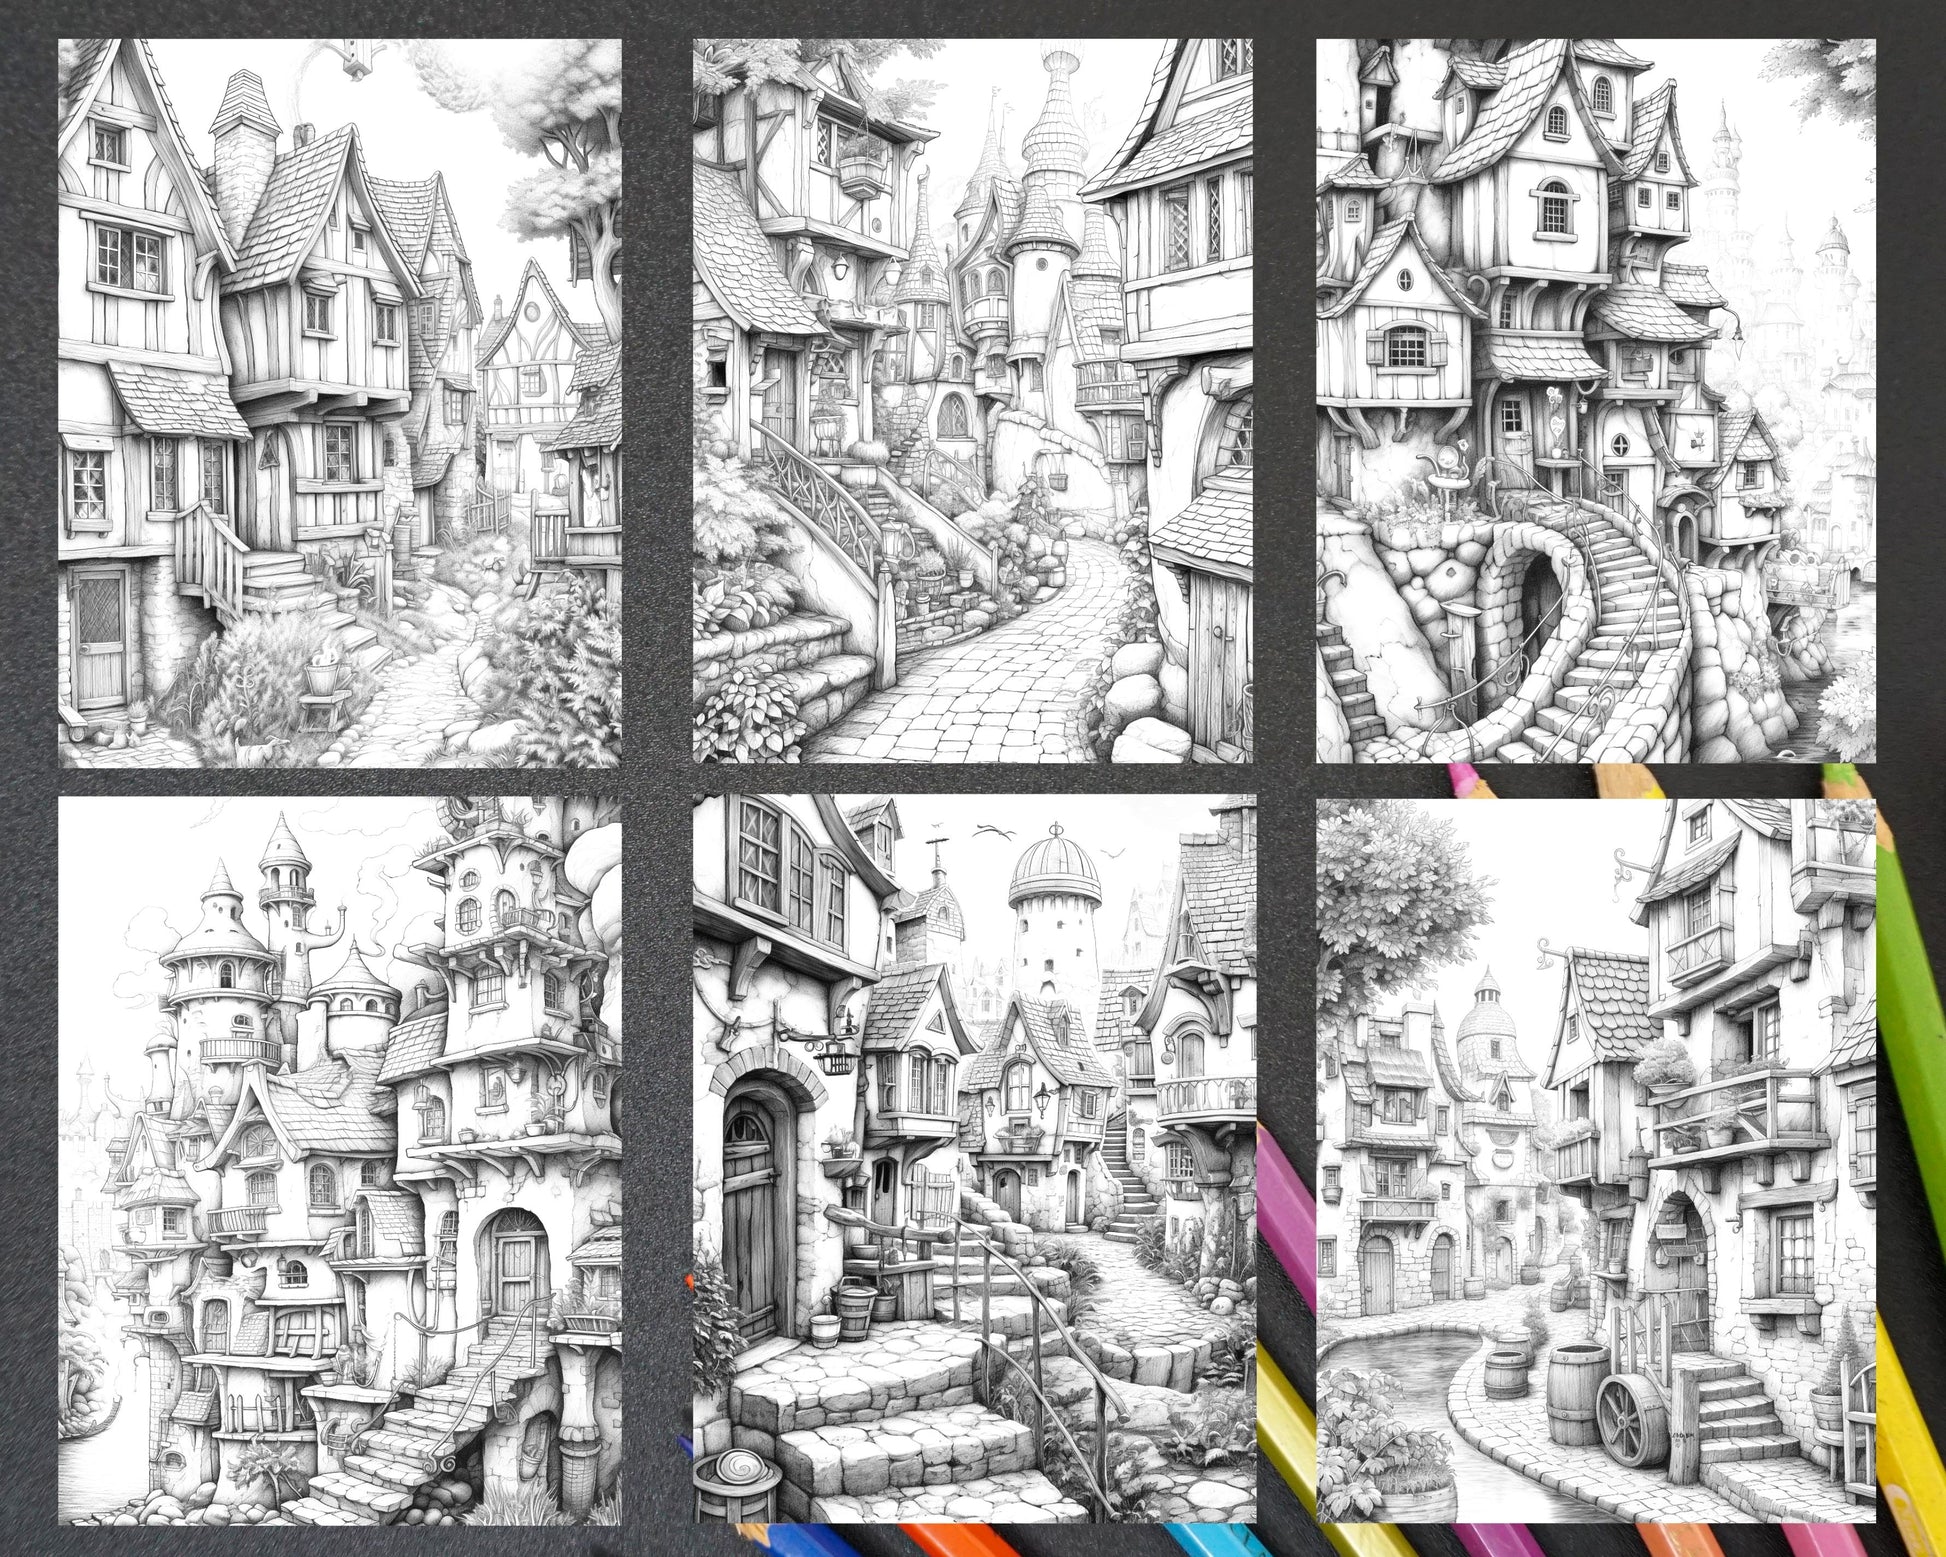 Fantasy Village Grayscale Coloring Pages for Adults, Printable Adult Coloring Pages - Fantasy Village, Grayscale Coloring Art for Stress Relief - Village Scene, Detailed Coloring Pages - Fantasy Village Illustration, Printable Fantasy Art for Adult Coloring - Village Theme